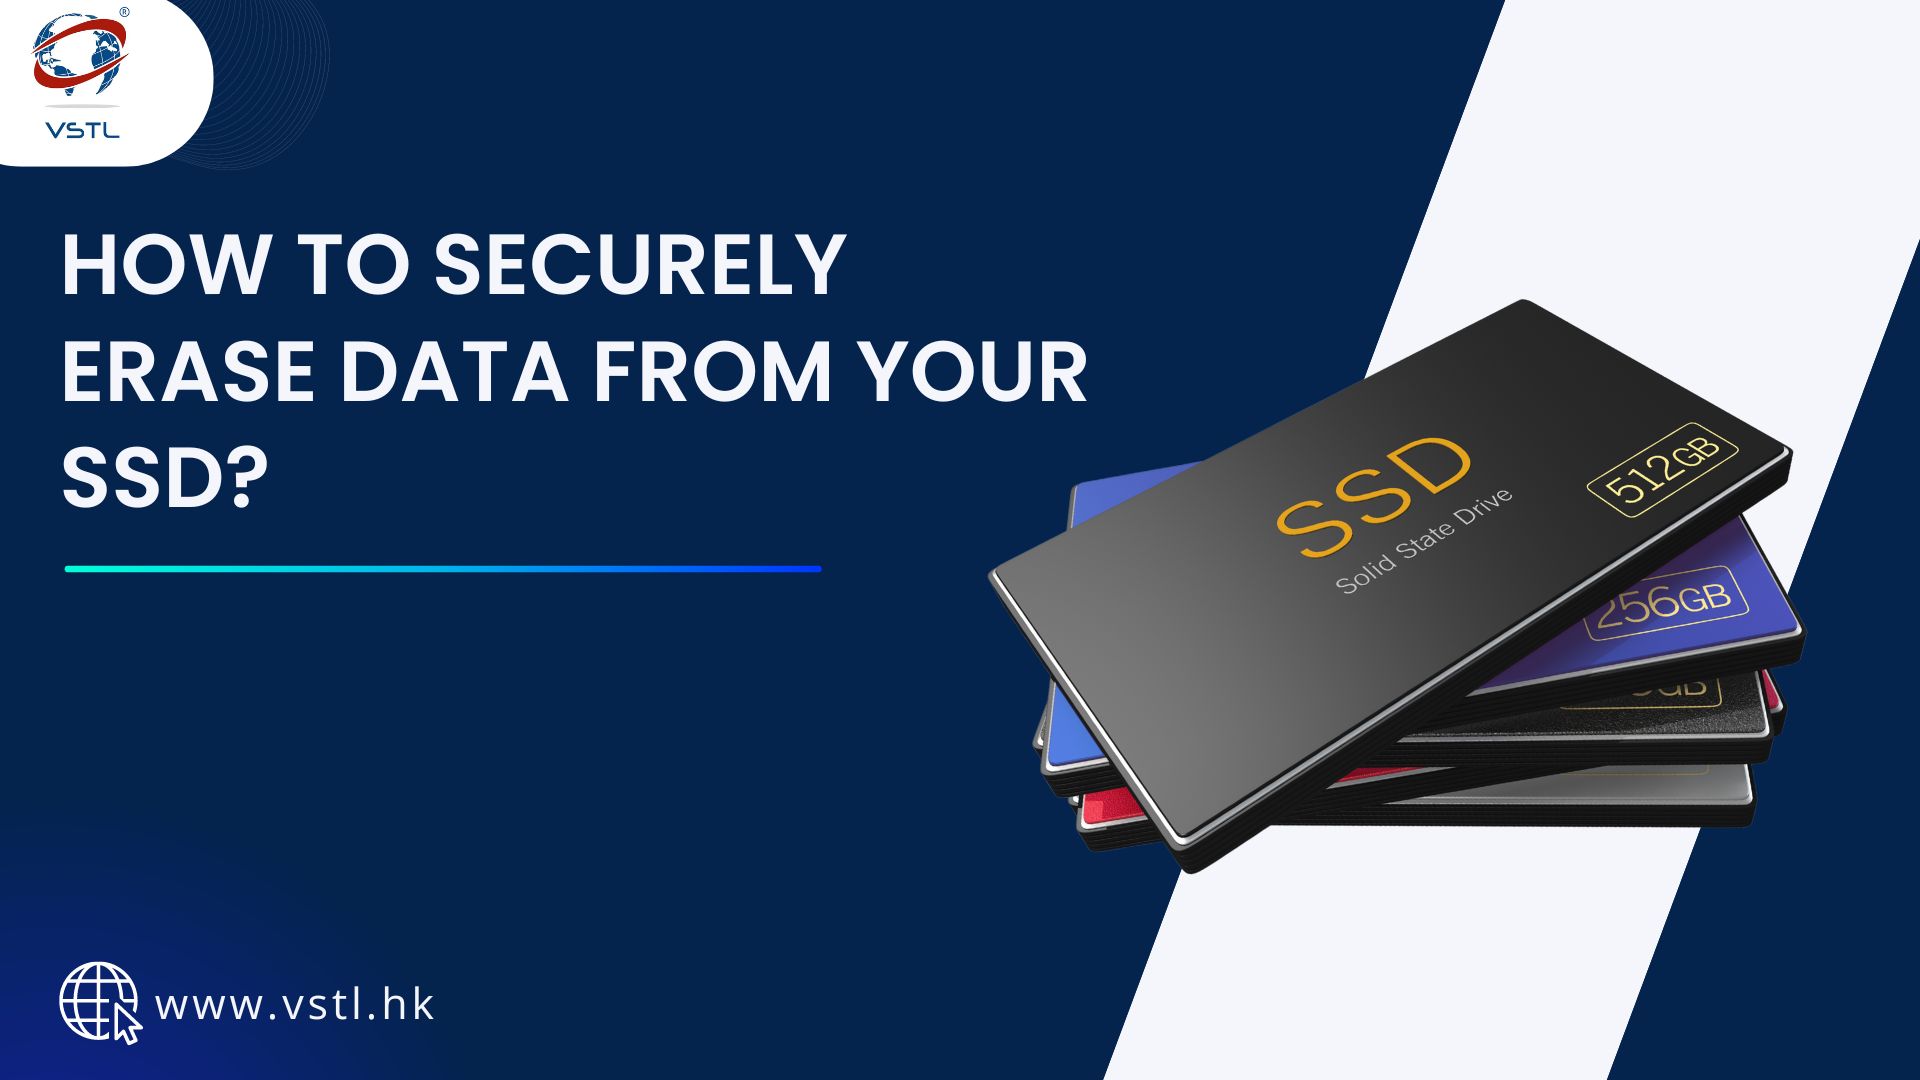 How to Securely Erase Data from Your SSD